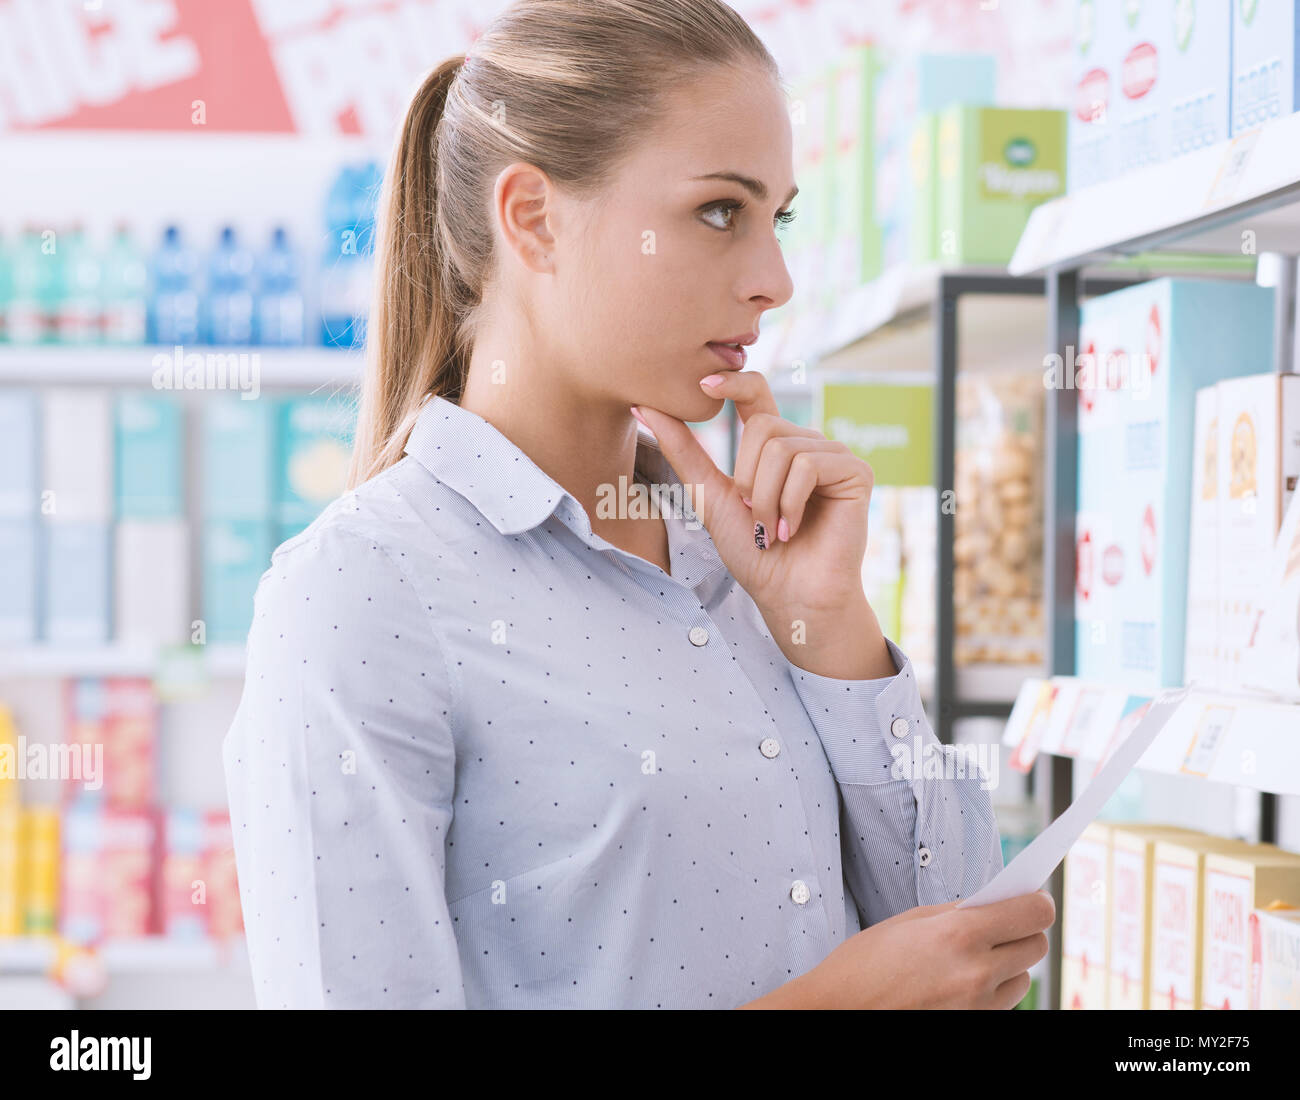 Young woman at the supermarket, she is holding a shopping list and searching products on a shelf Stock Photo